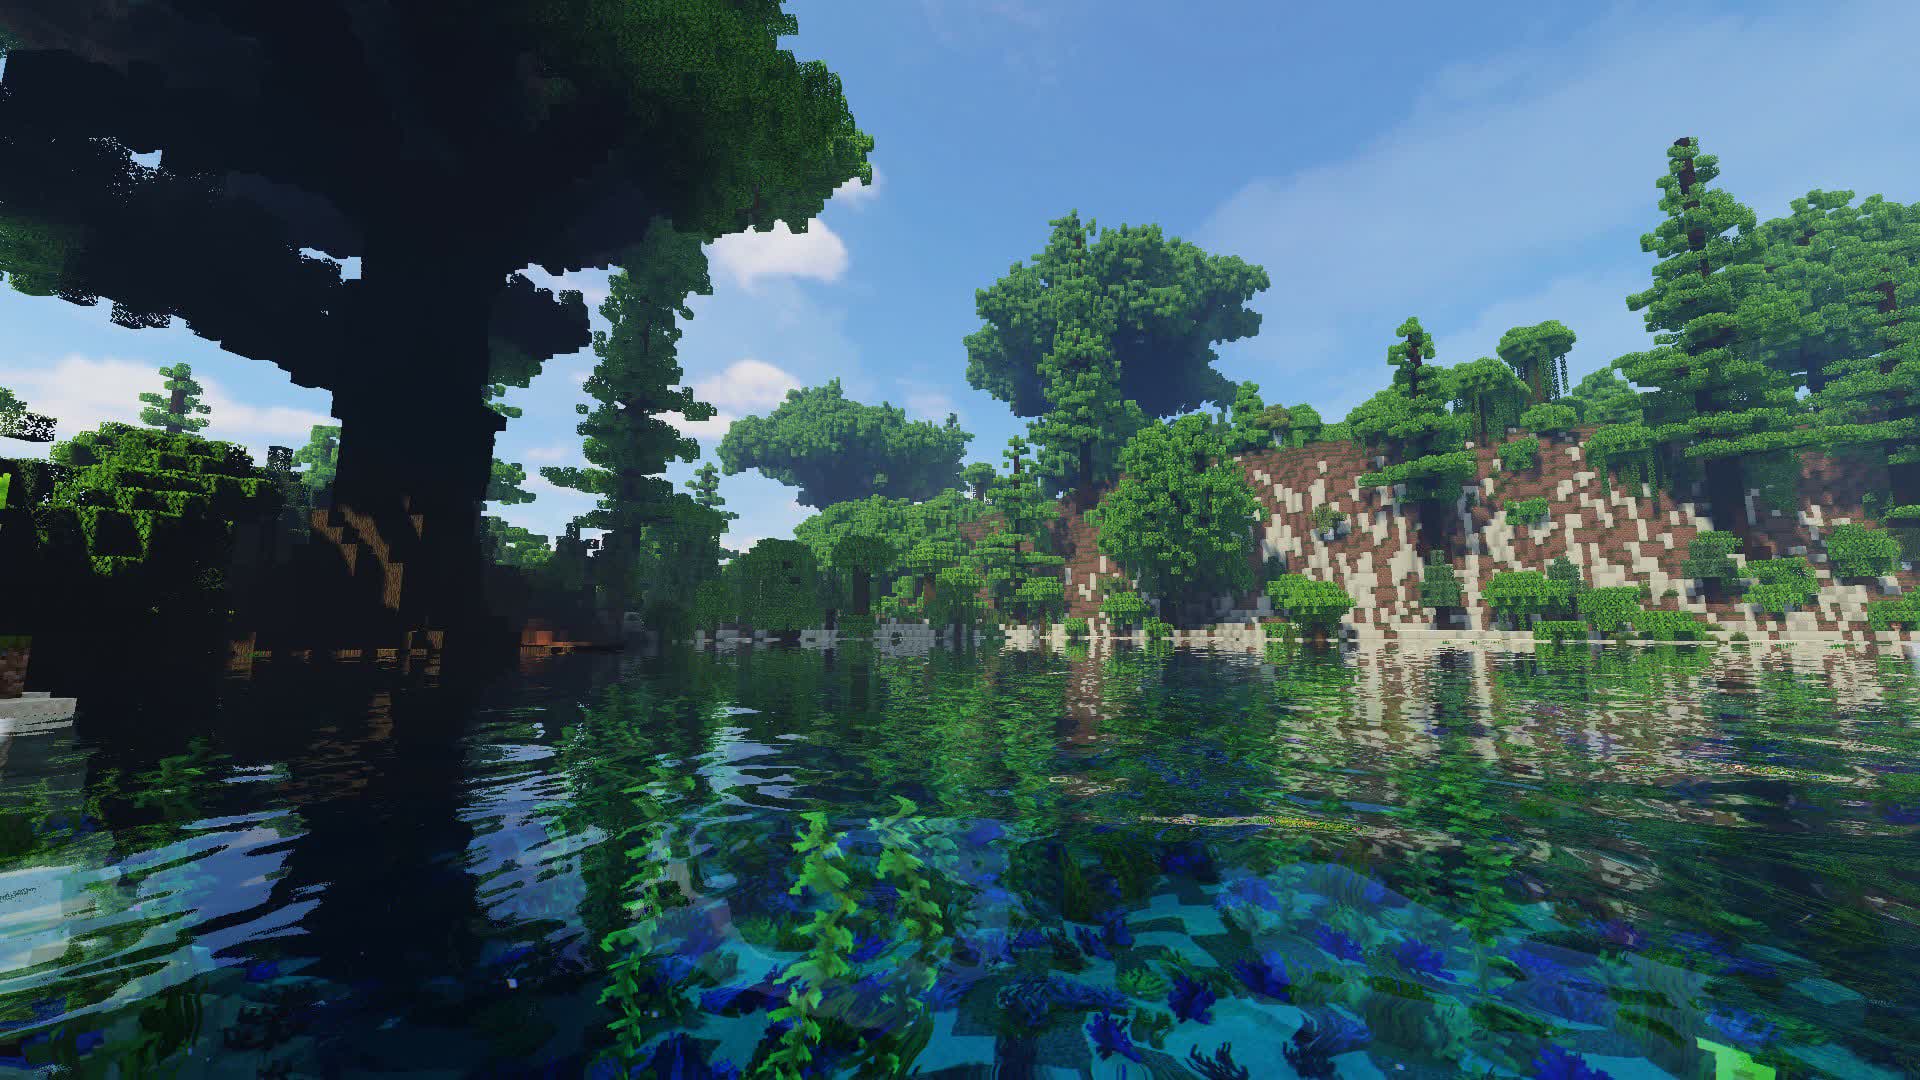 You can become a virtual landscaper in Minecraft, earning $70 per hour